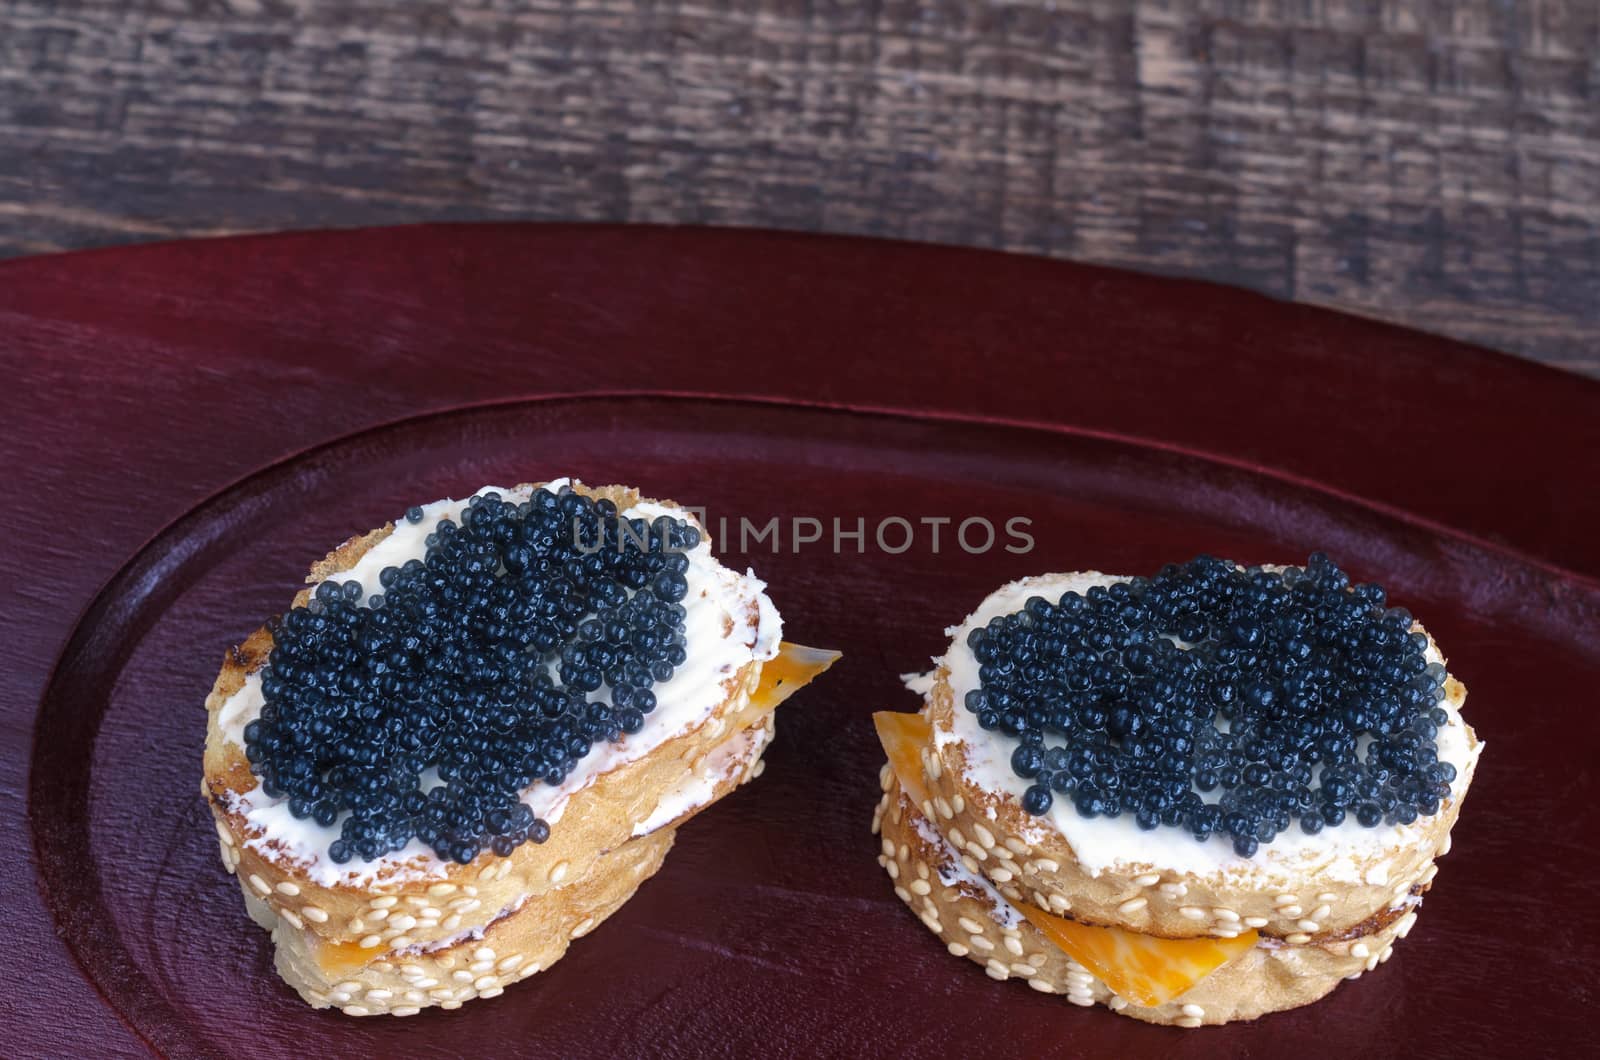 Sandwiches with black caviar on a wooden tray. Analog products.